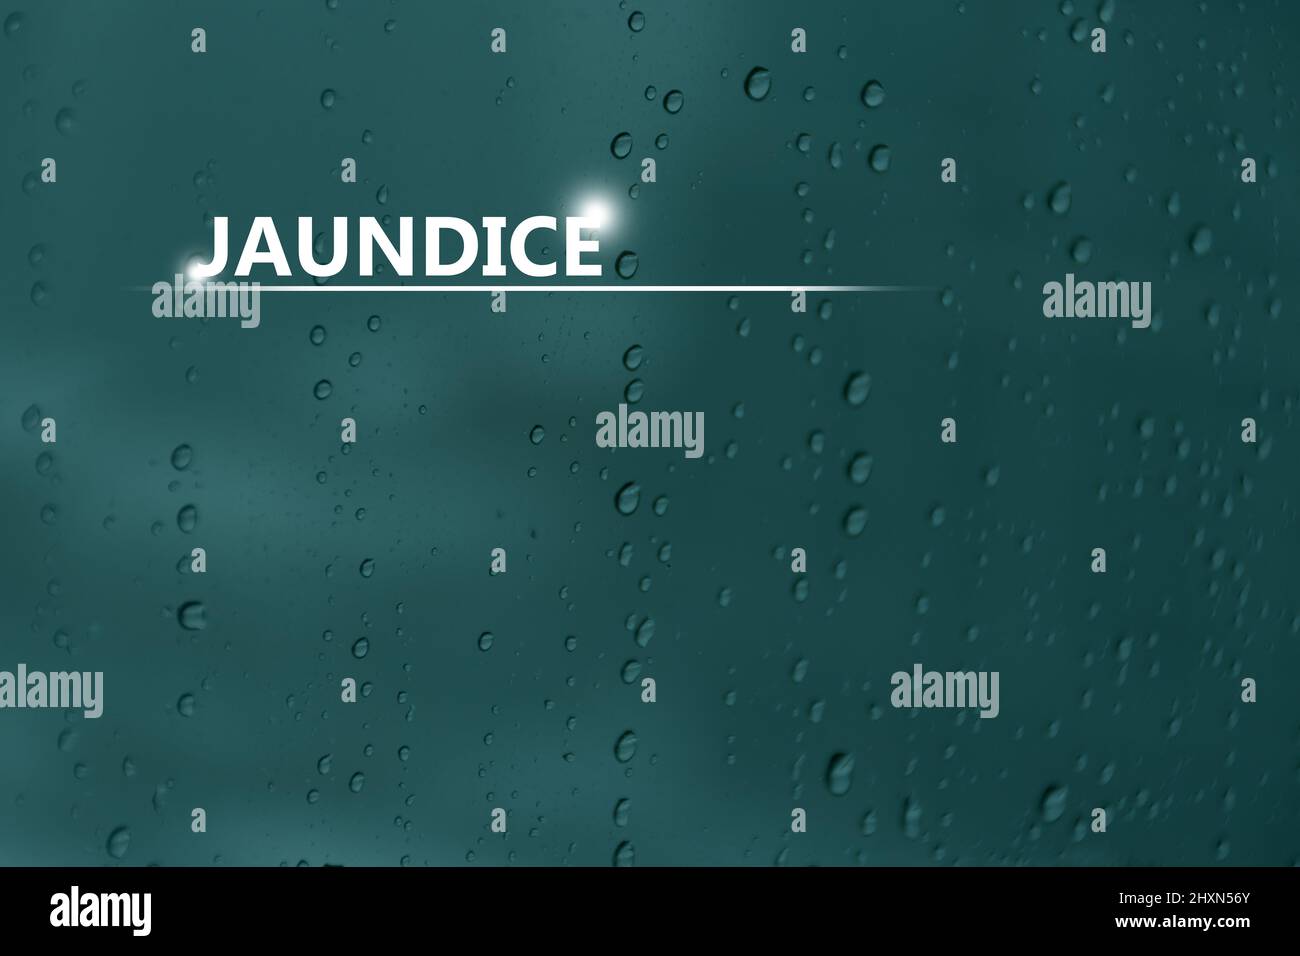 Medical banner 'Jaundice' on blue background with drops and large copy space for text or checklist. Stock Photo